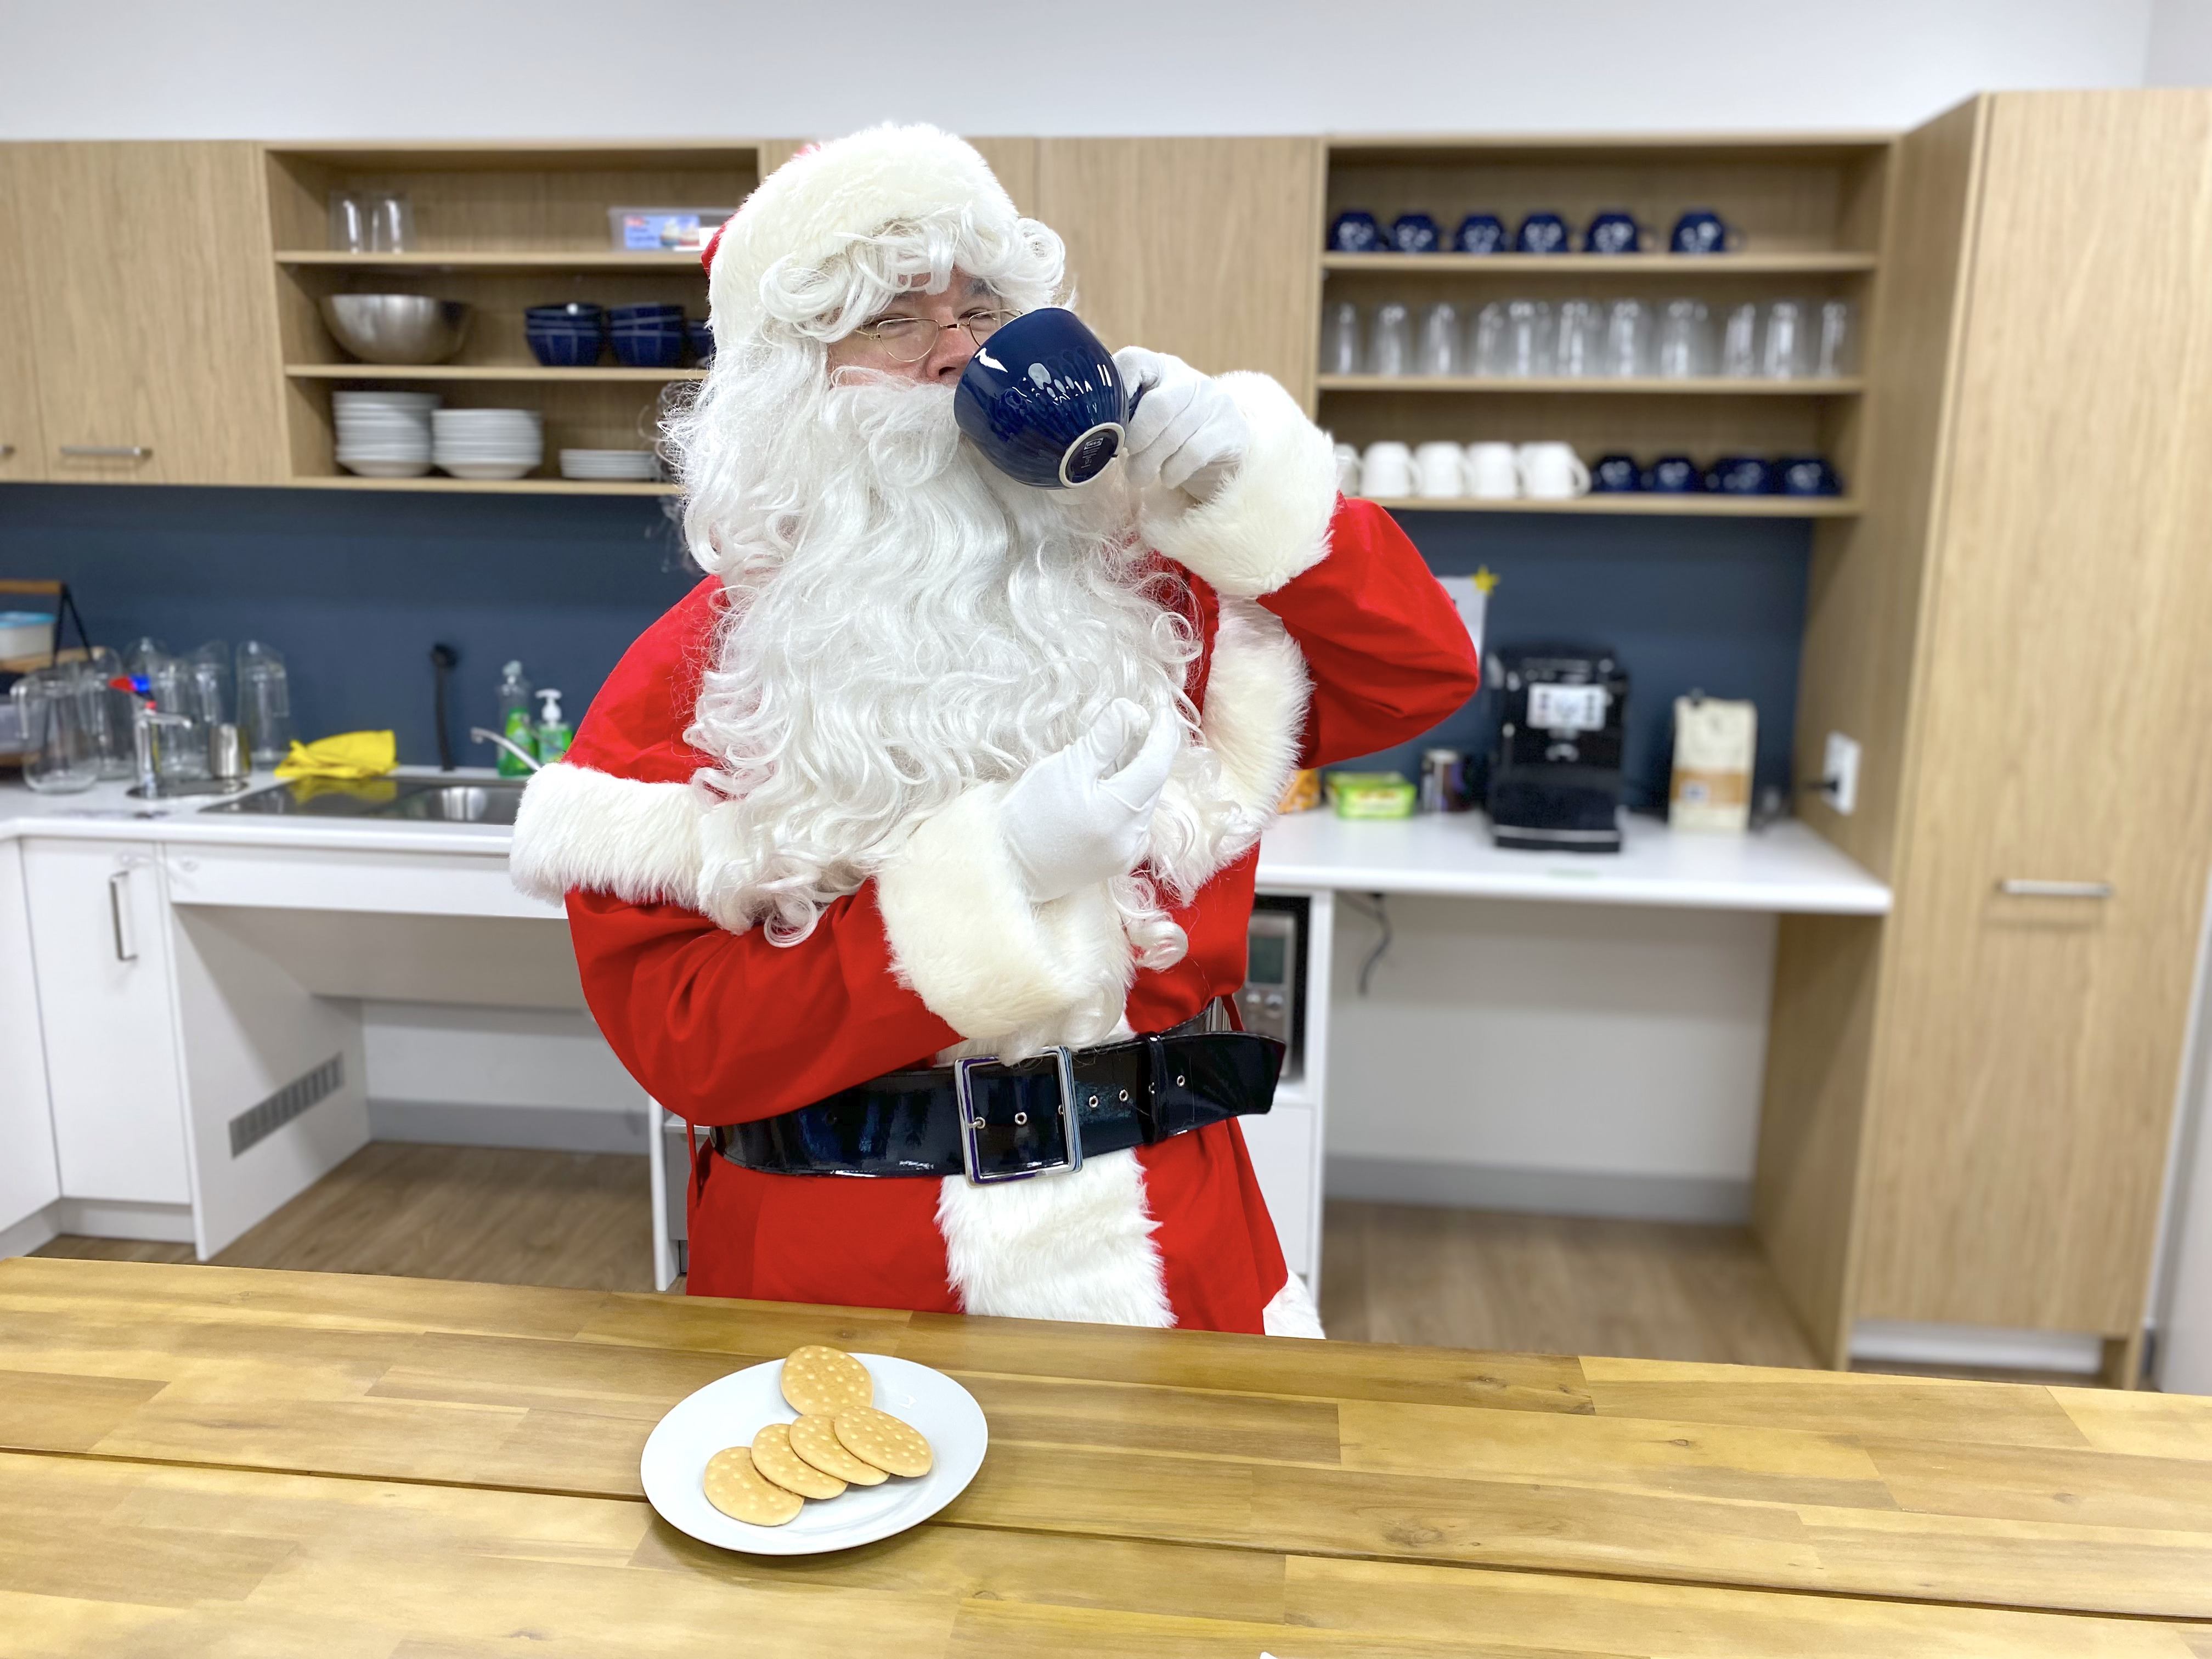 Santa in the Mamre kitchen drinking from a cup holding cookies